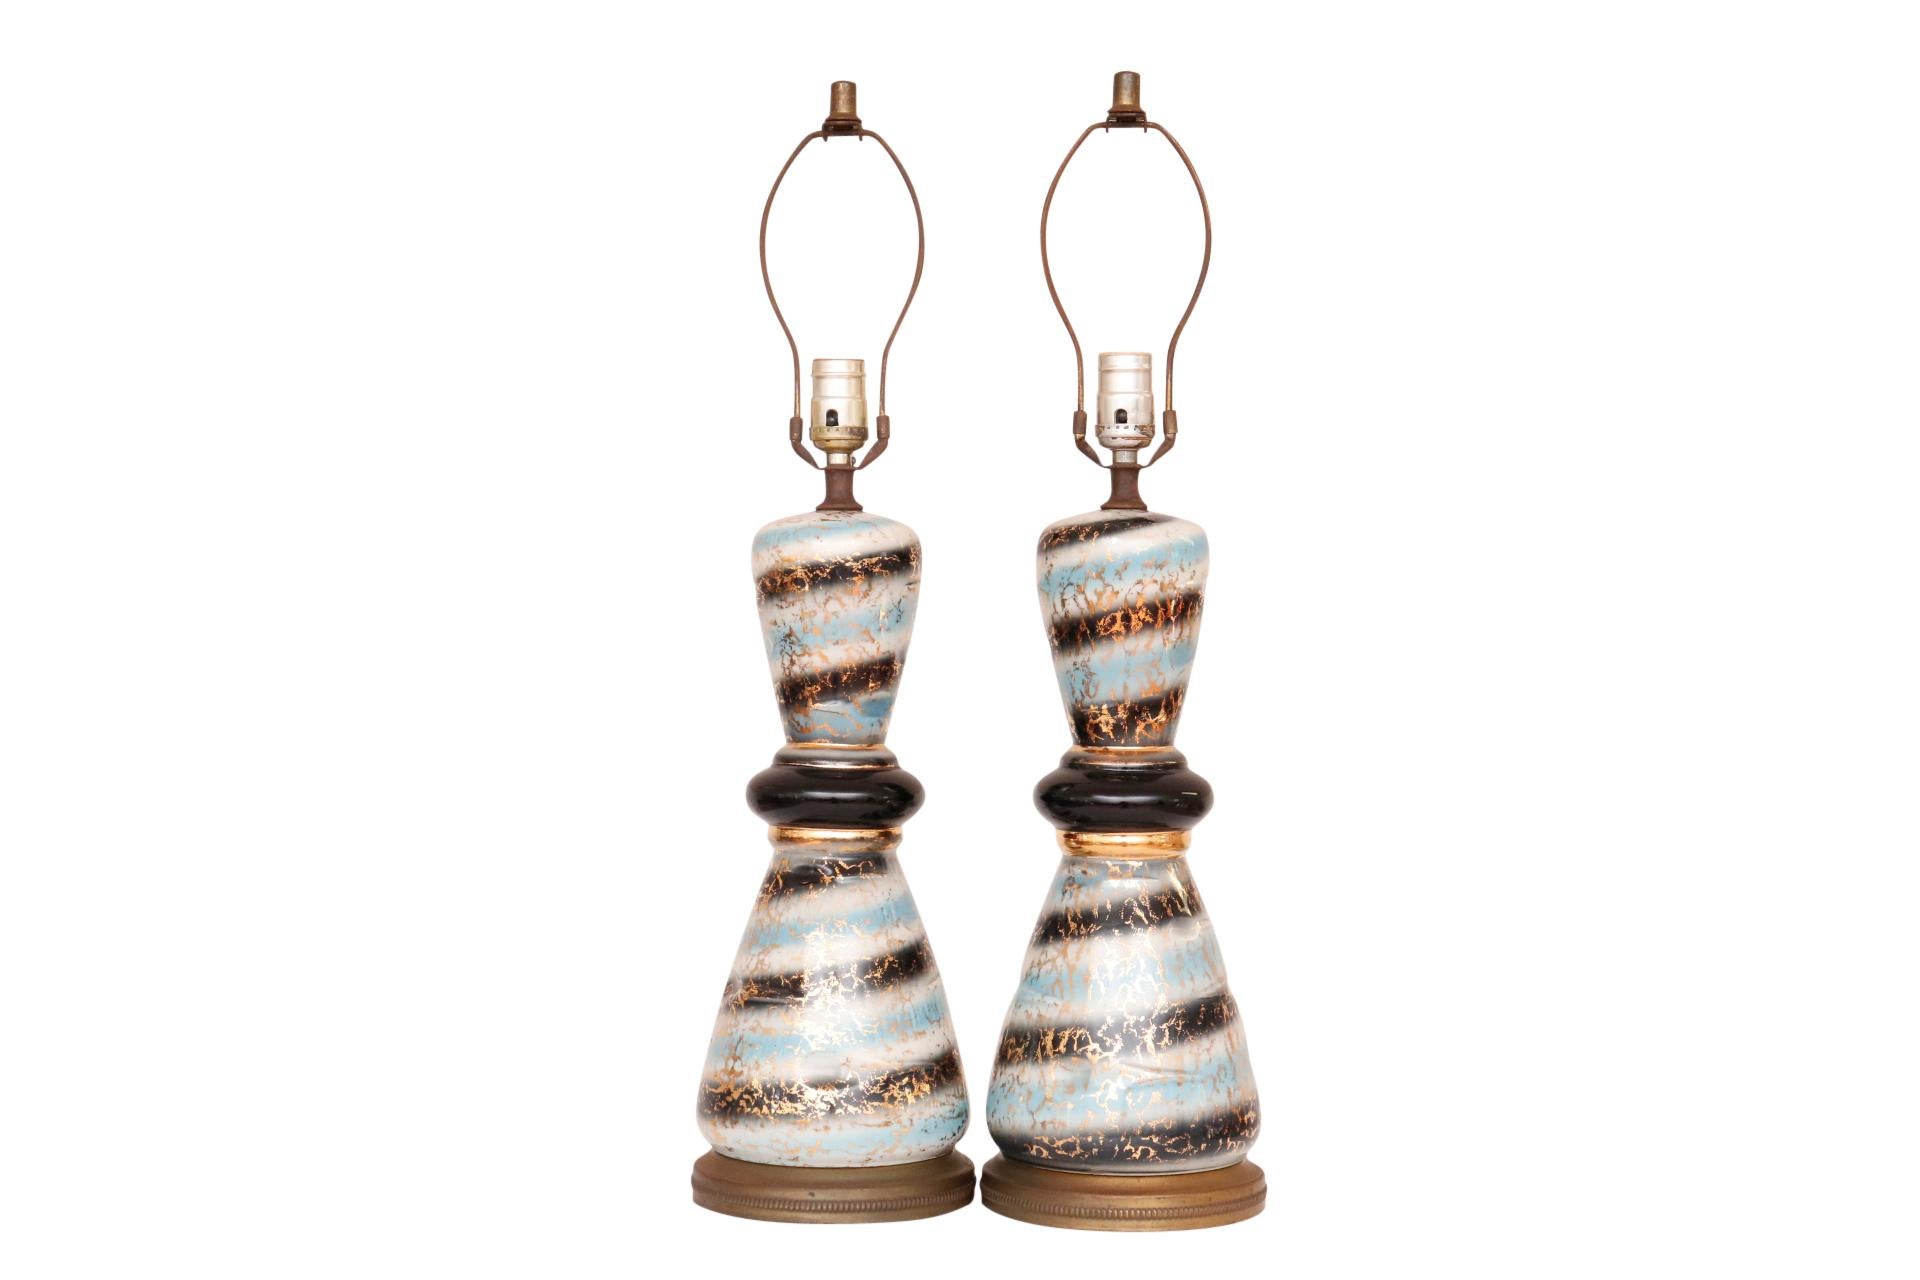 North American Hollywood Regency Table Lamps, a Pair